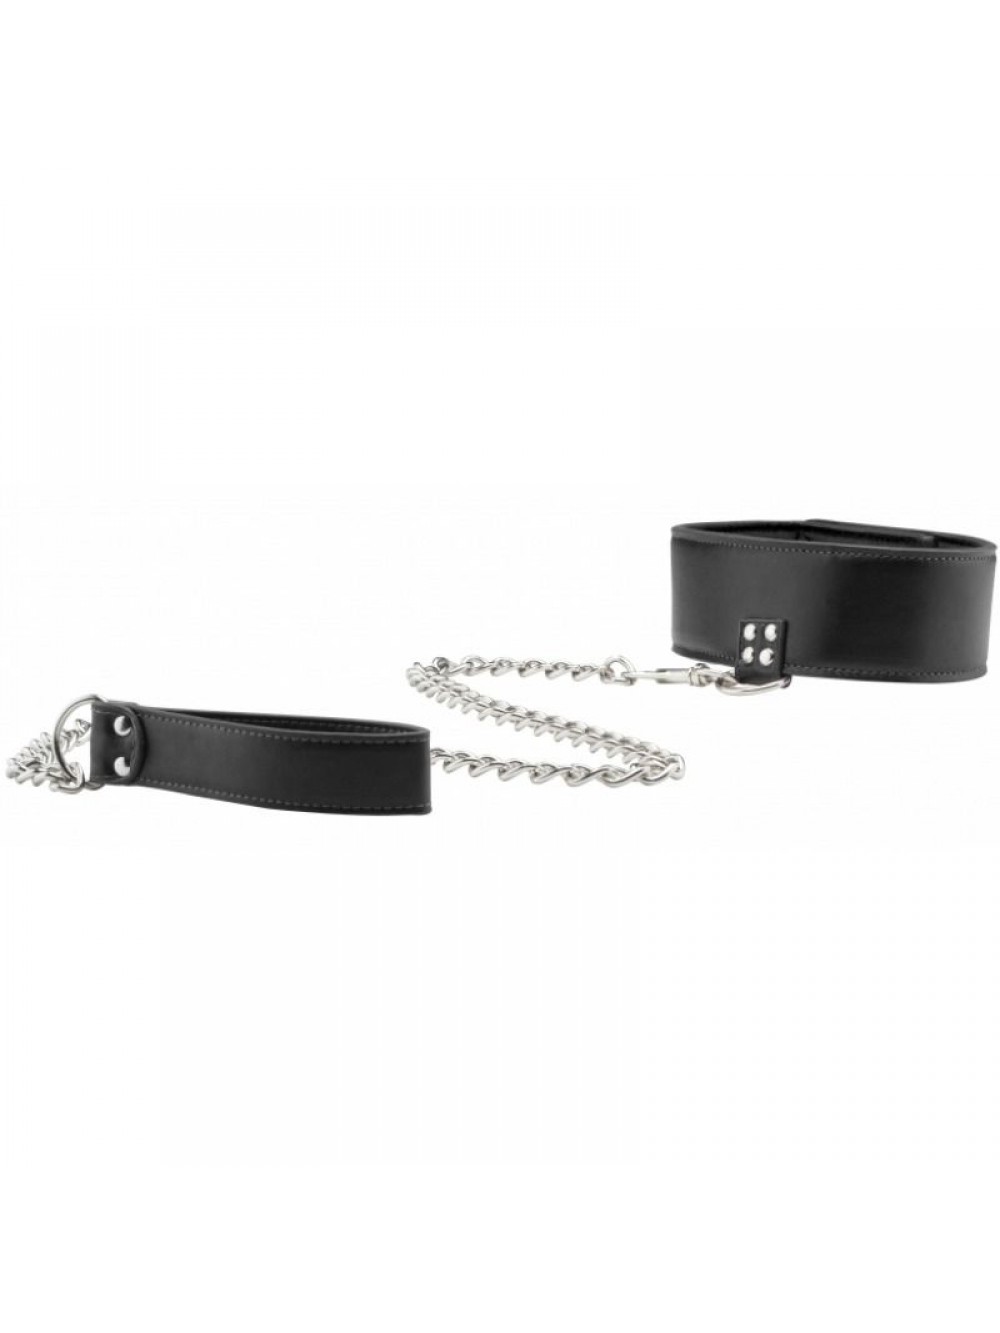 REVERSIBLE COLLAR WITH LEASH-BLACK 8714273786531